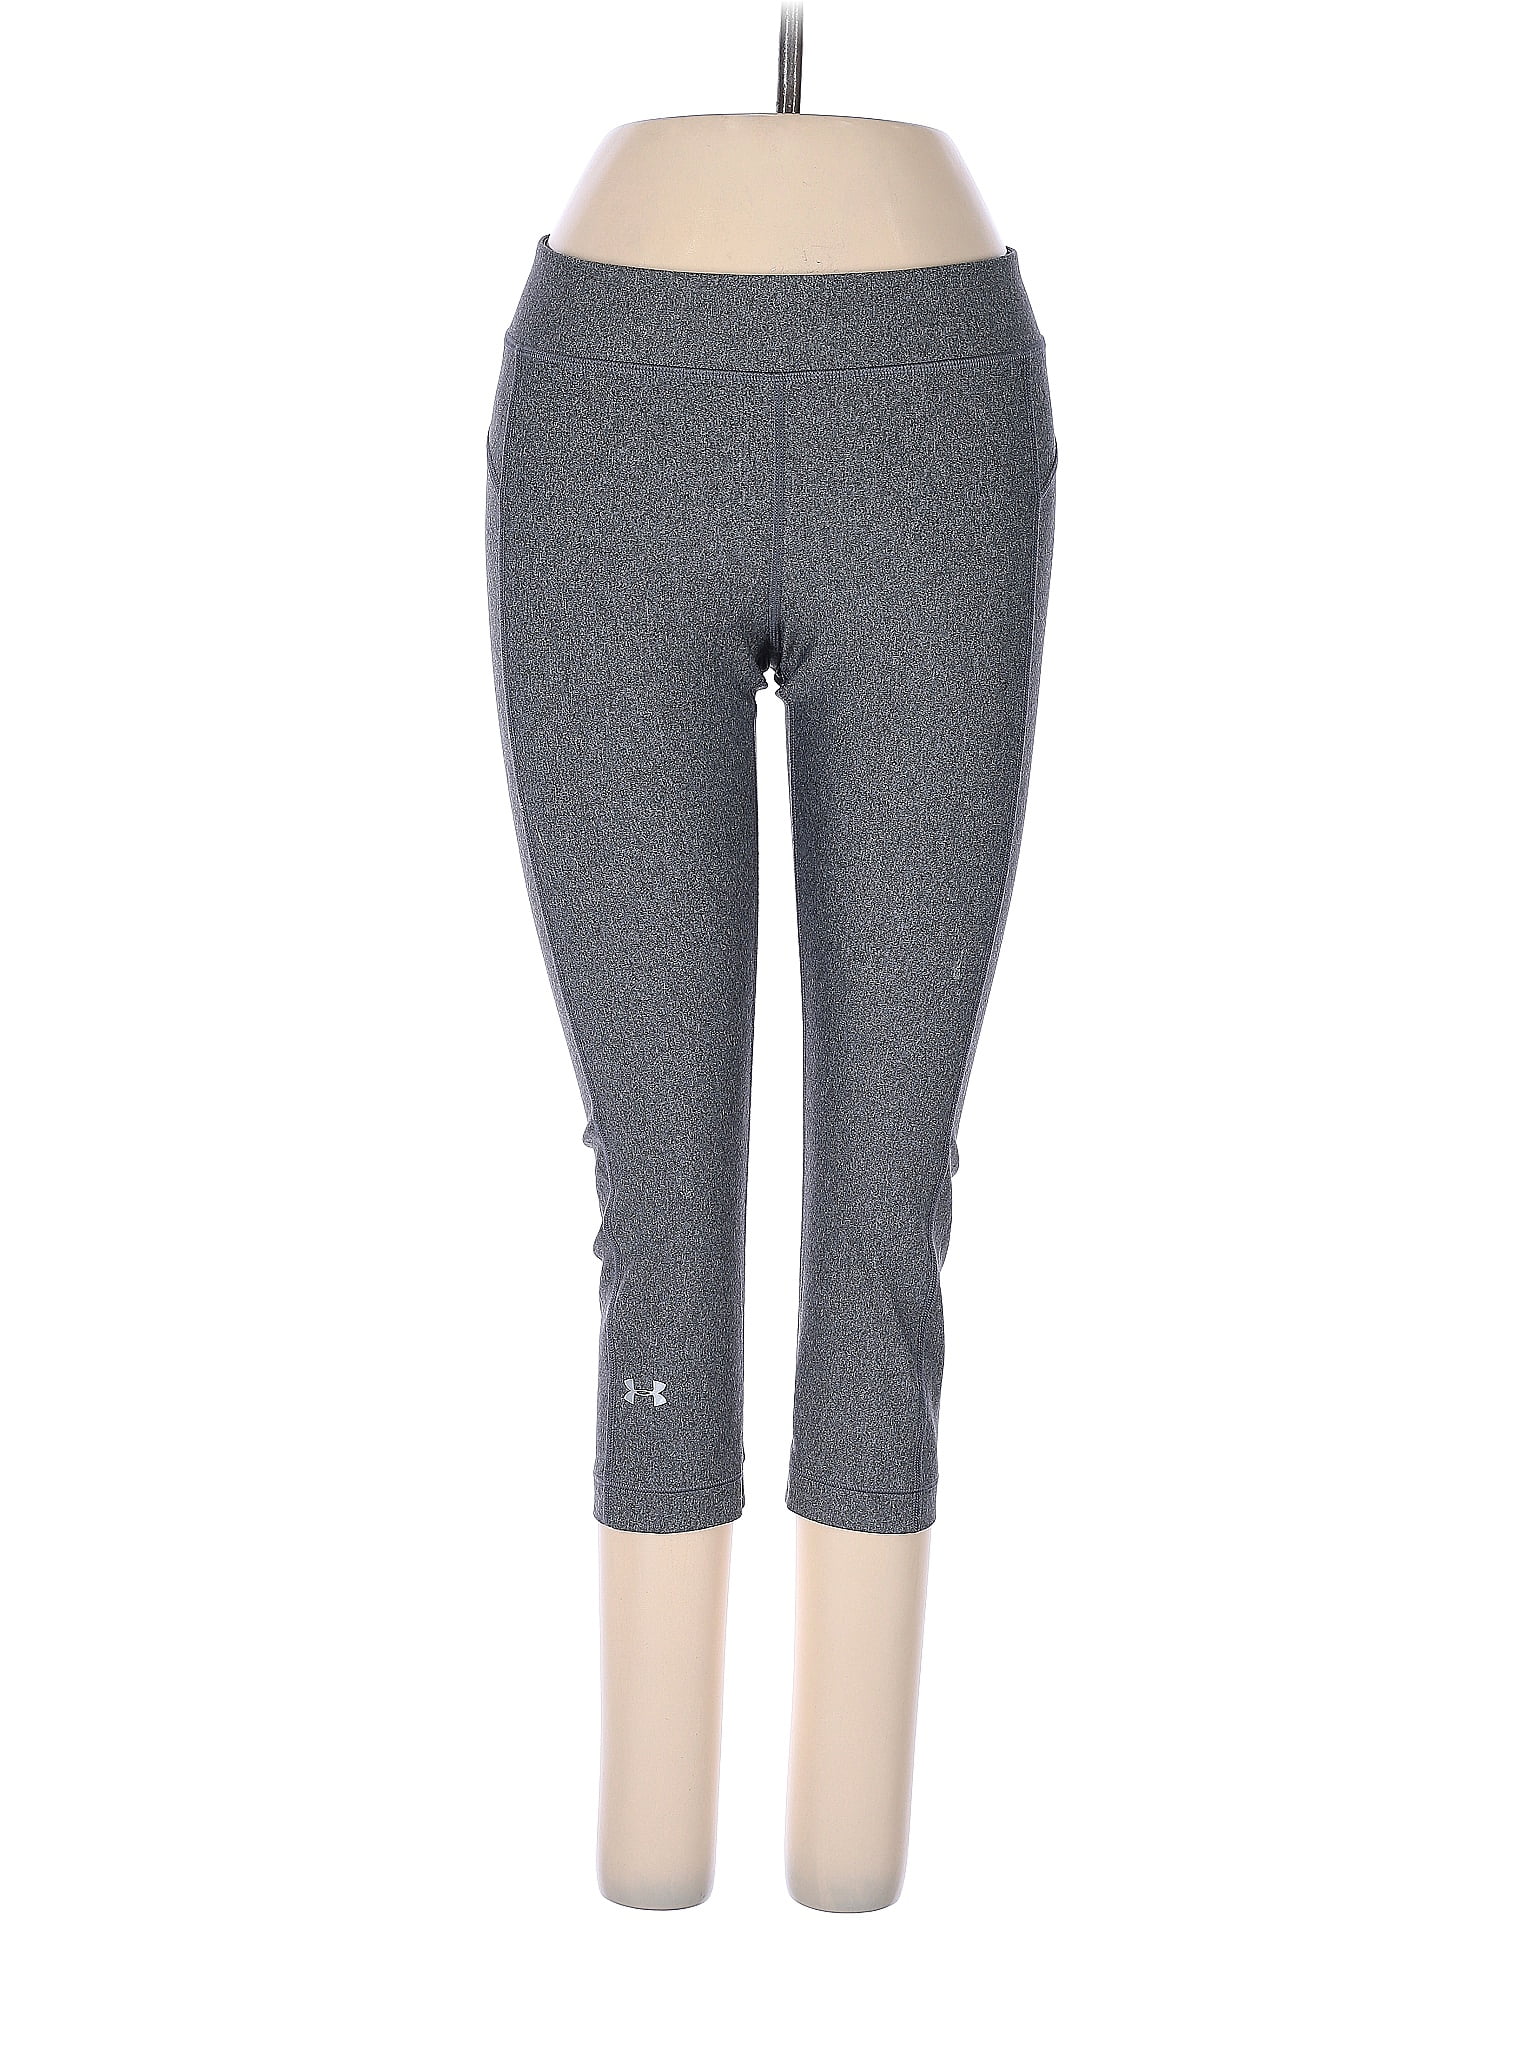 Under Armour Gray Active Pants Size S - 52% off